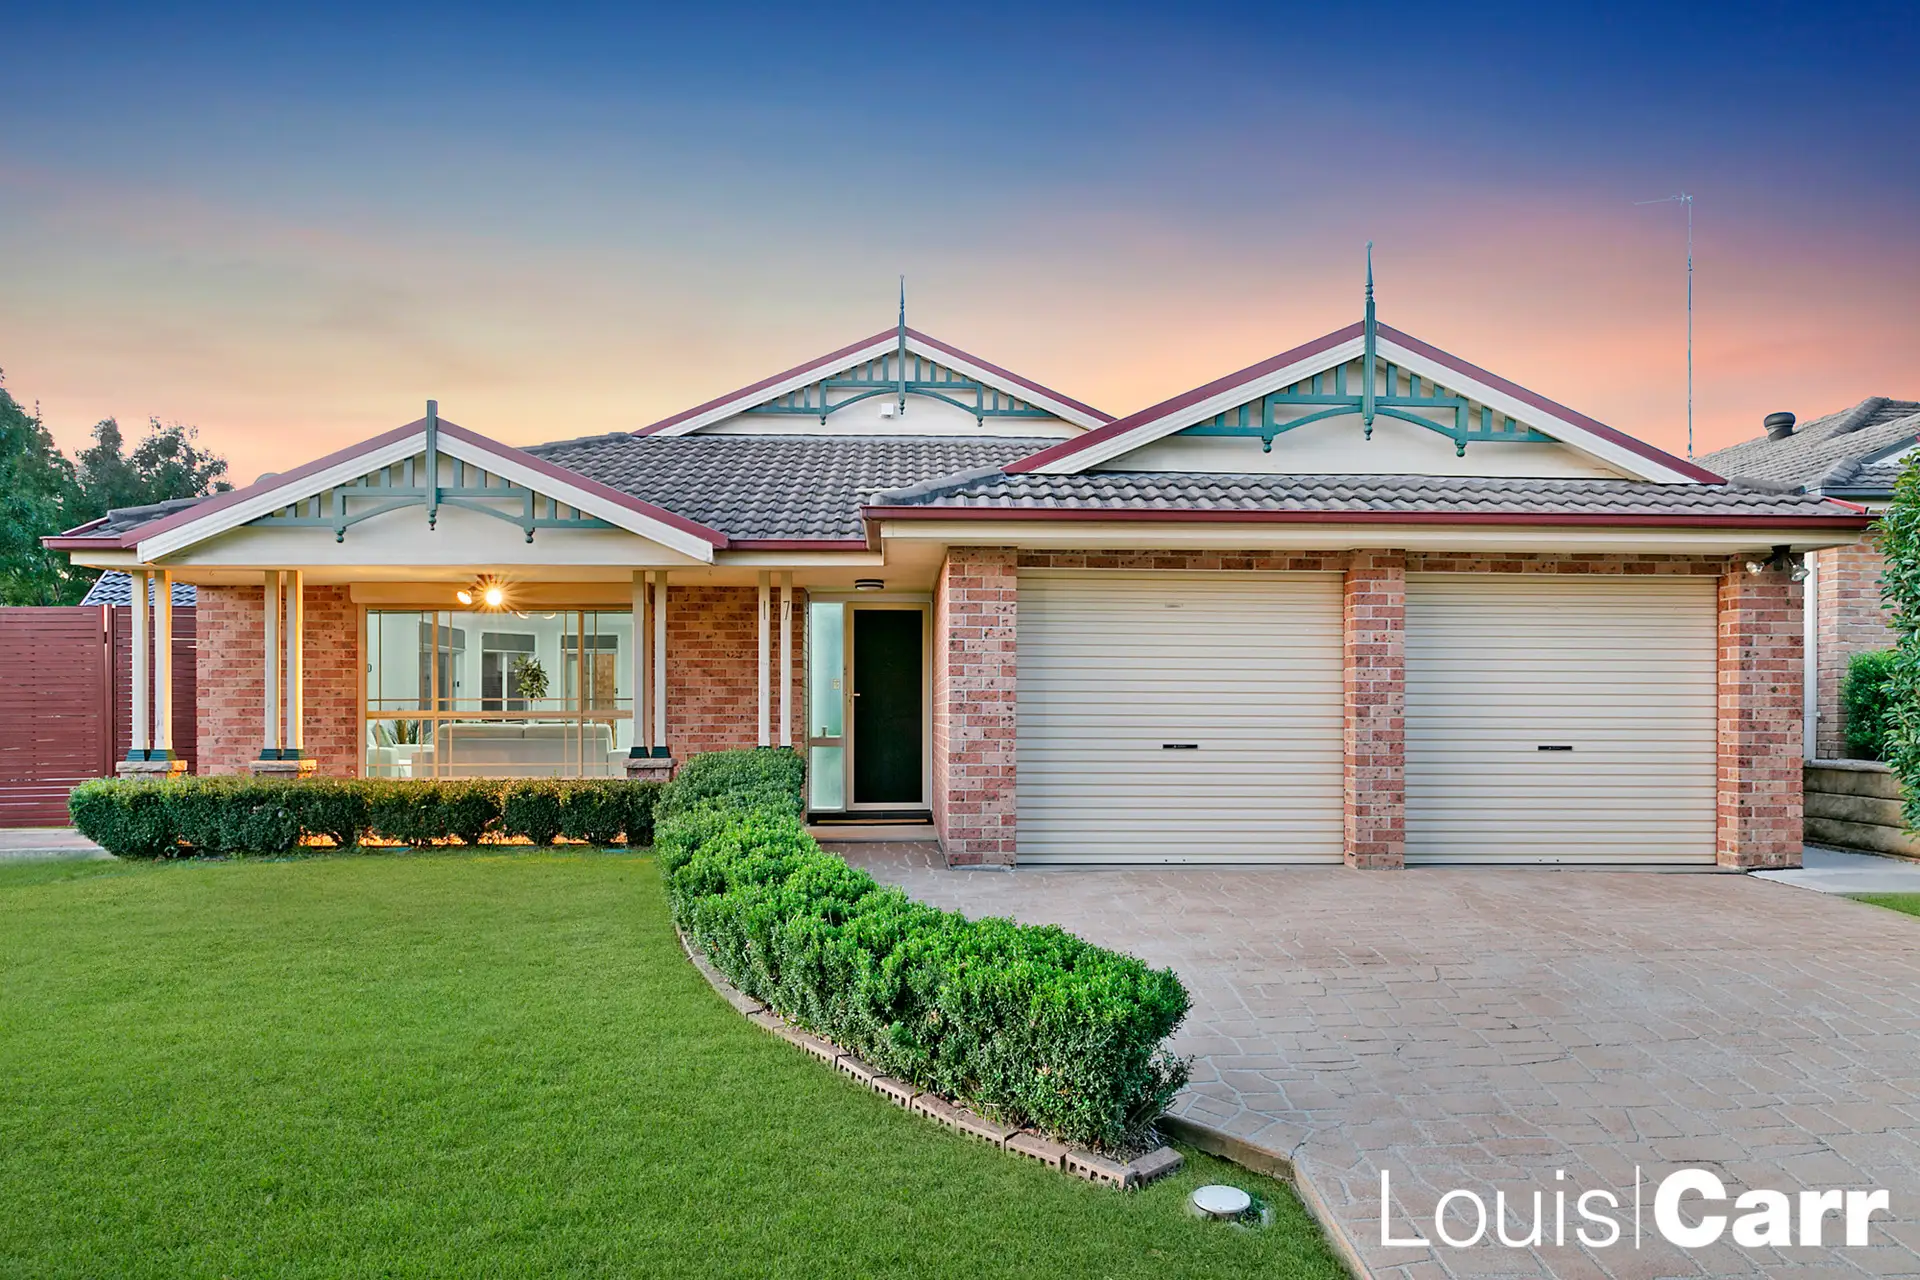 Photo #1: 17 Hotham Avenue, Beaumont Hills - Sold by Louis Carr Real Estate